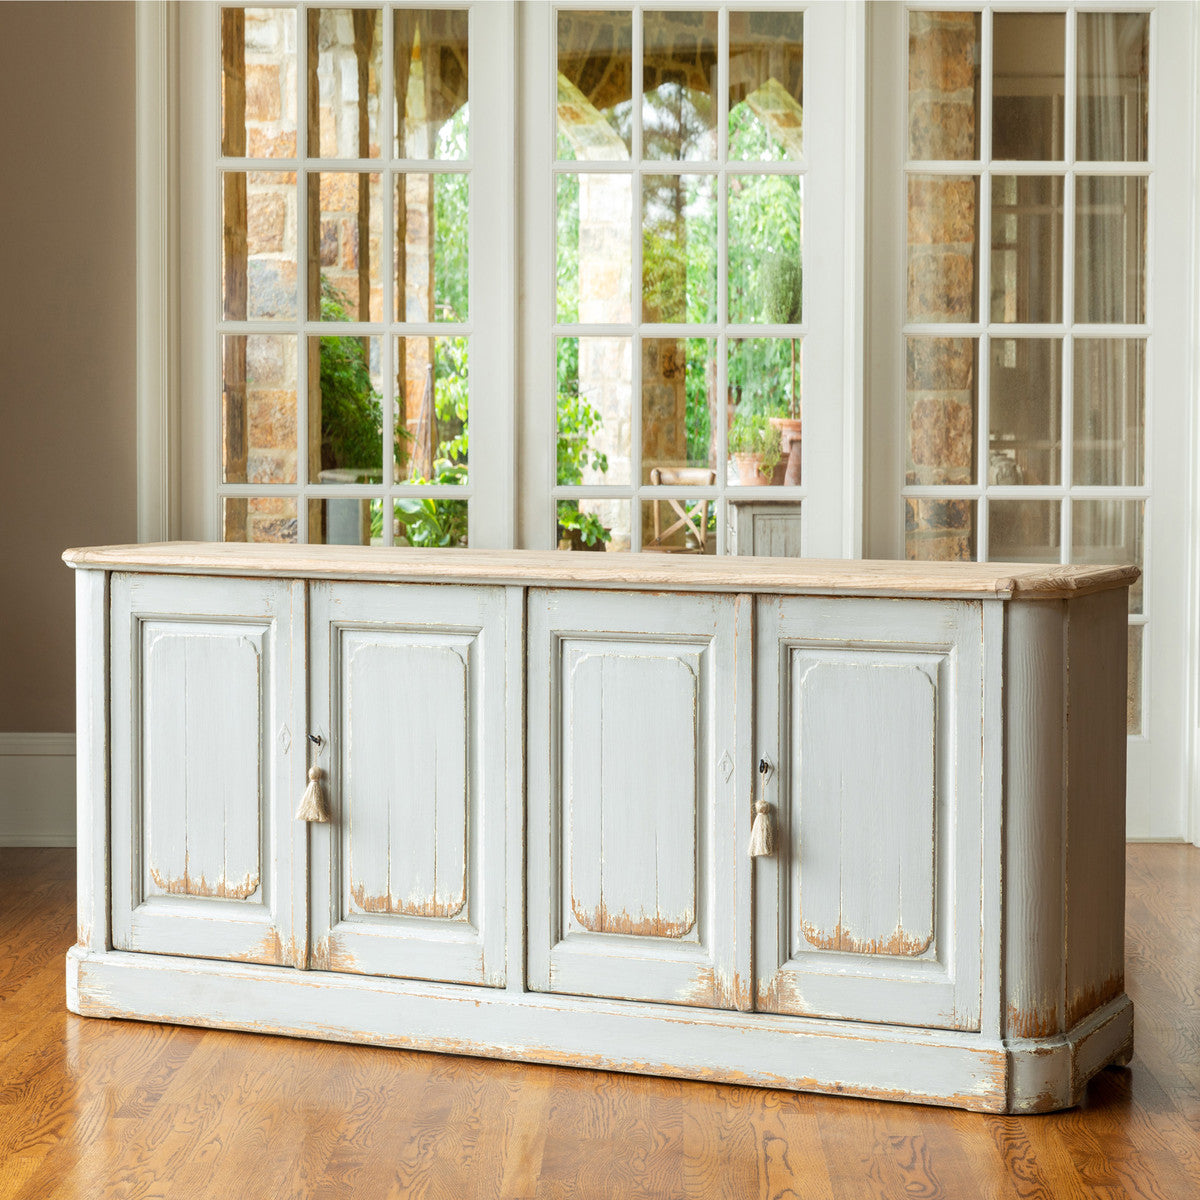 How to Paint Farmhouse Furniture